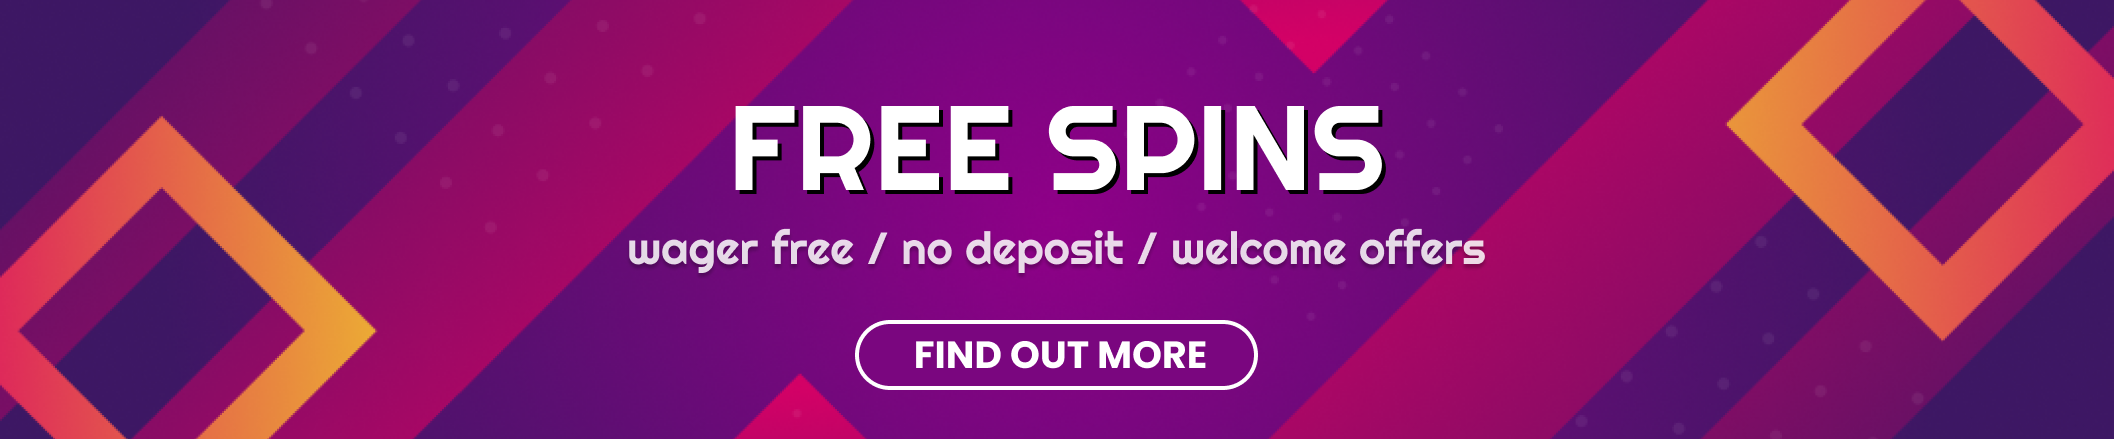 Free Spins: wager free, no deposit, welcome offers